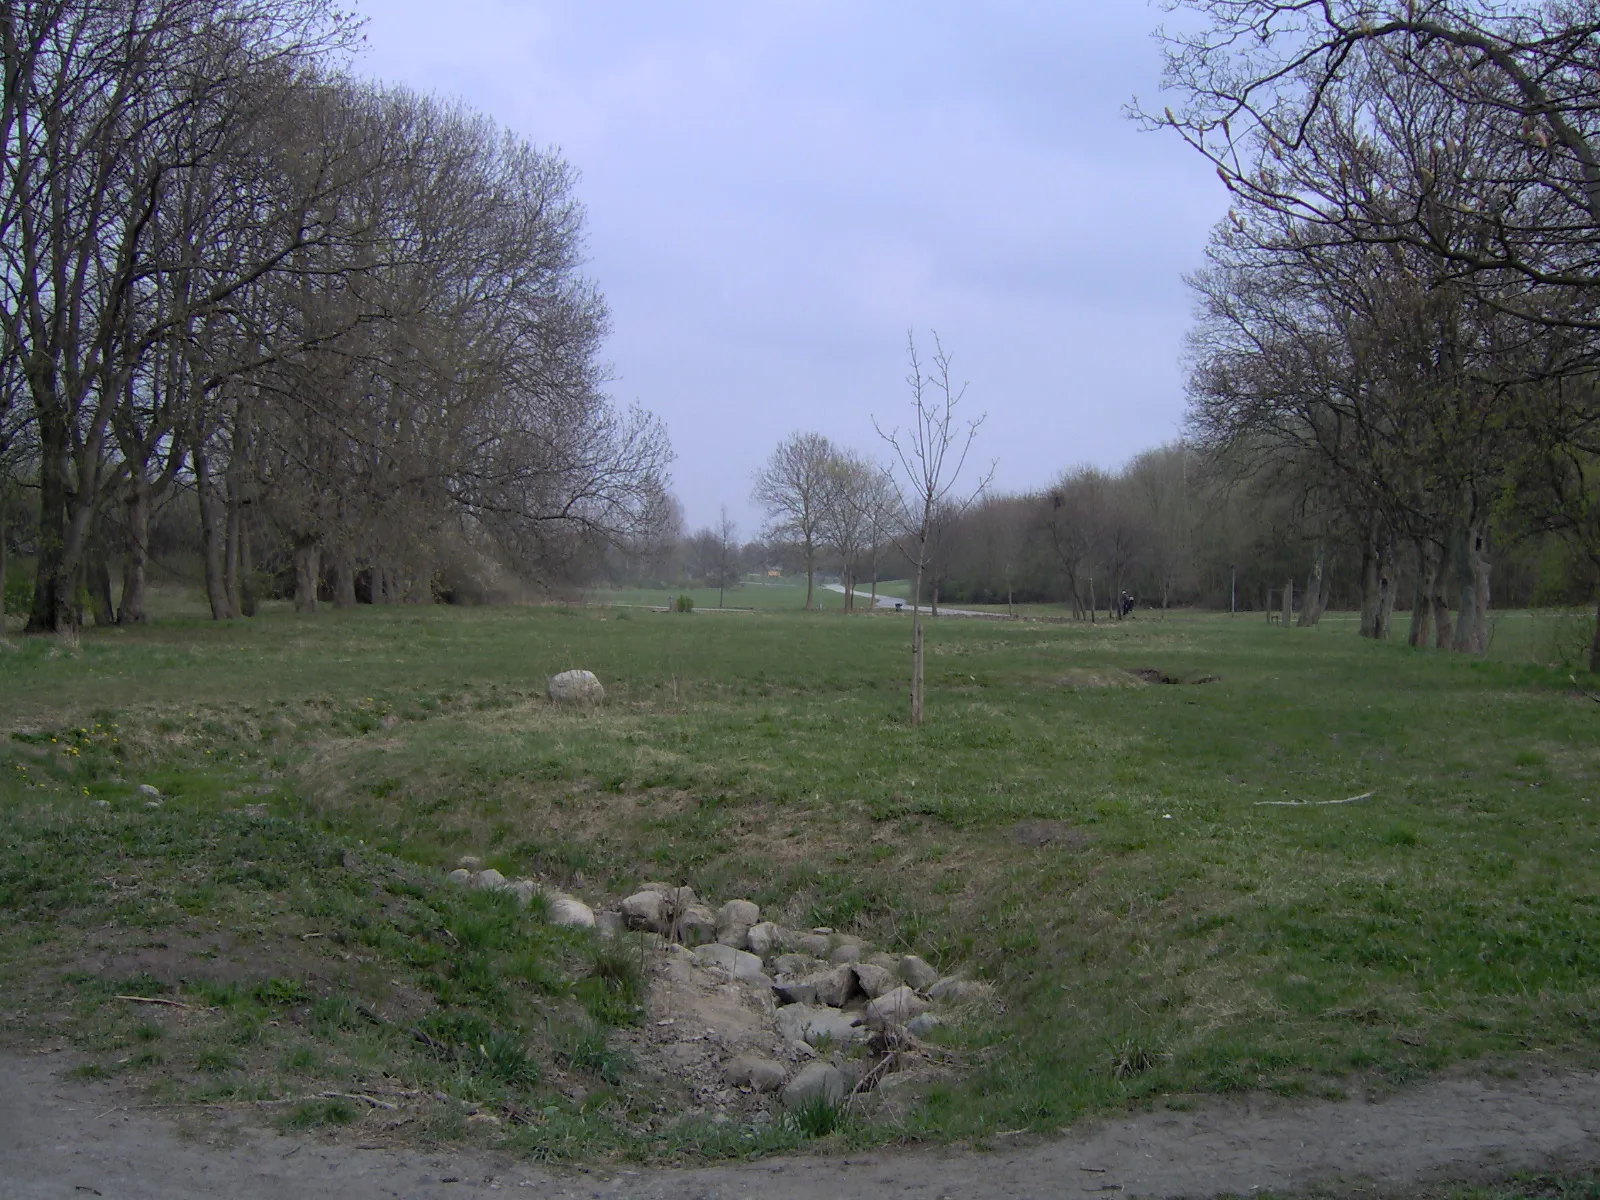 Photo showing: St Hans backar, park area in Lund

Source: taken by user april 30th 2005